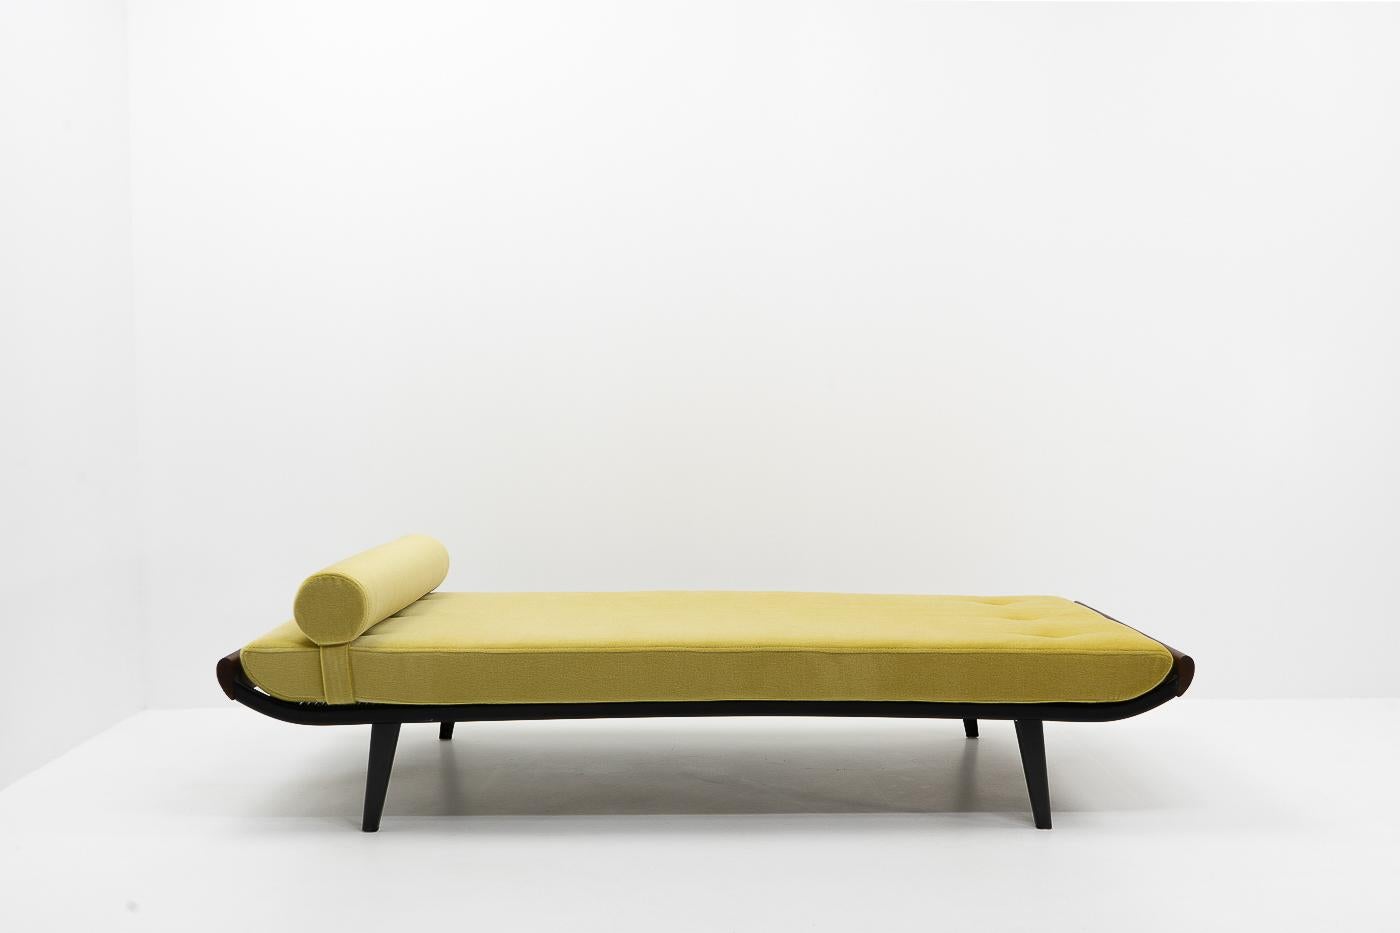 Vintage daybed designed by Dick Cordemeijer for Auping (the Netherlands) during the 1950s.

New exclusive mustard-colored natural mohair and foam; the daybed can be used as both a sofa and spare bed. The cover features a zipper on both pillow and